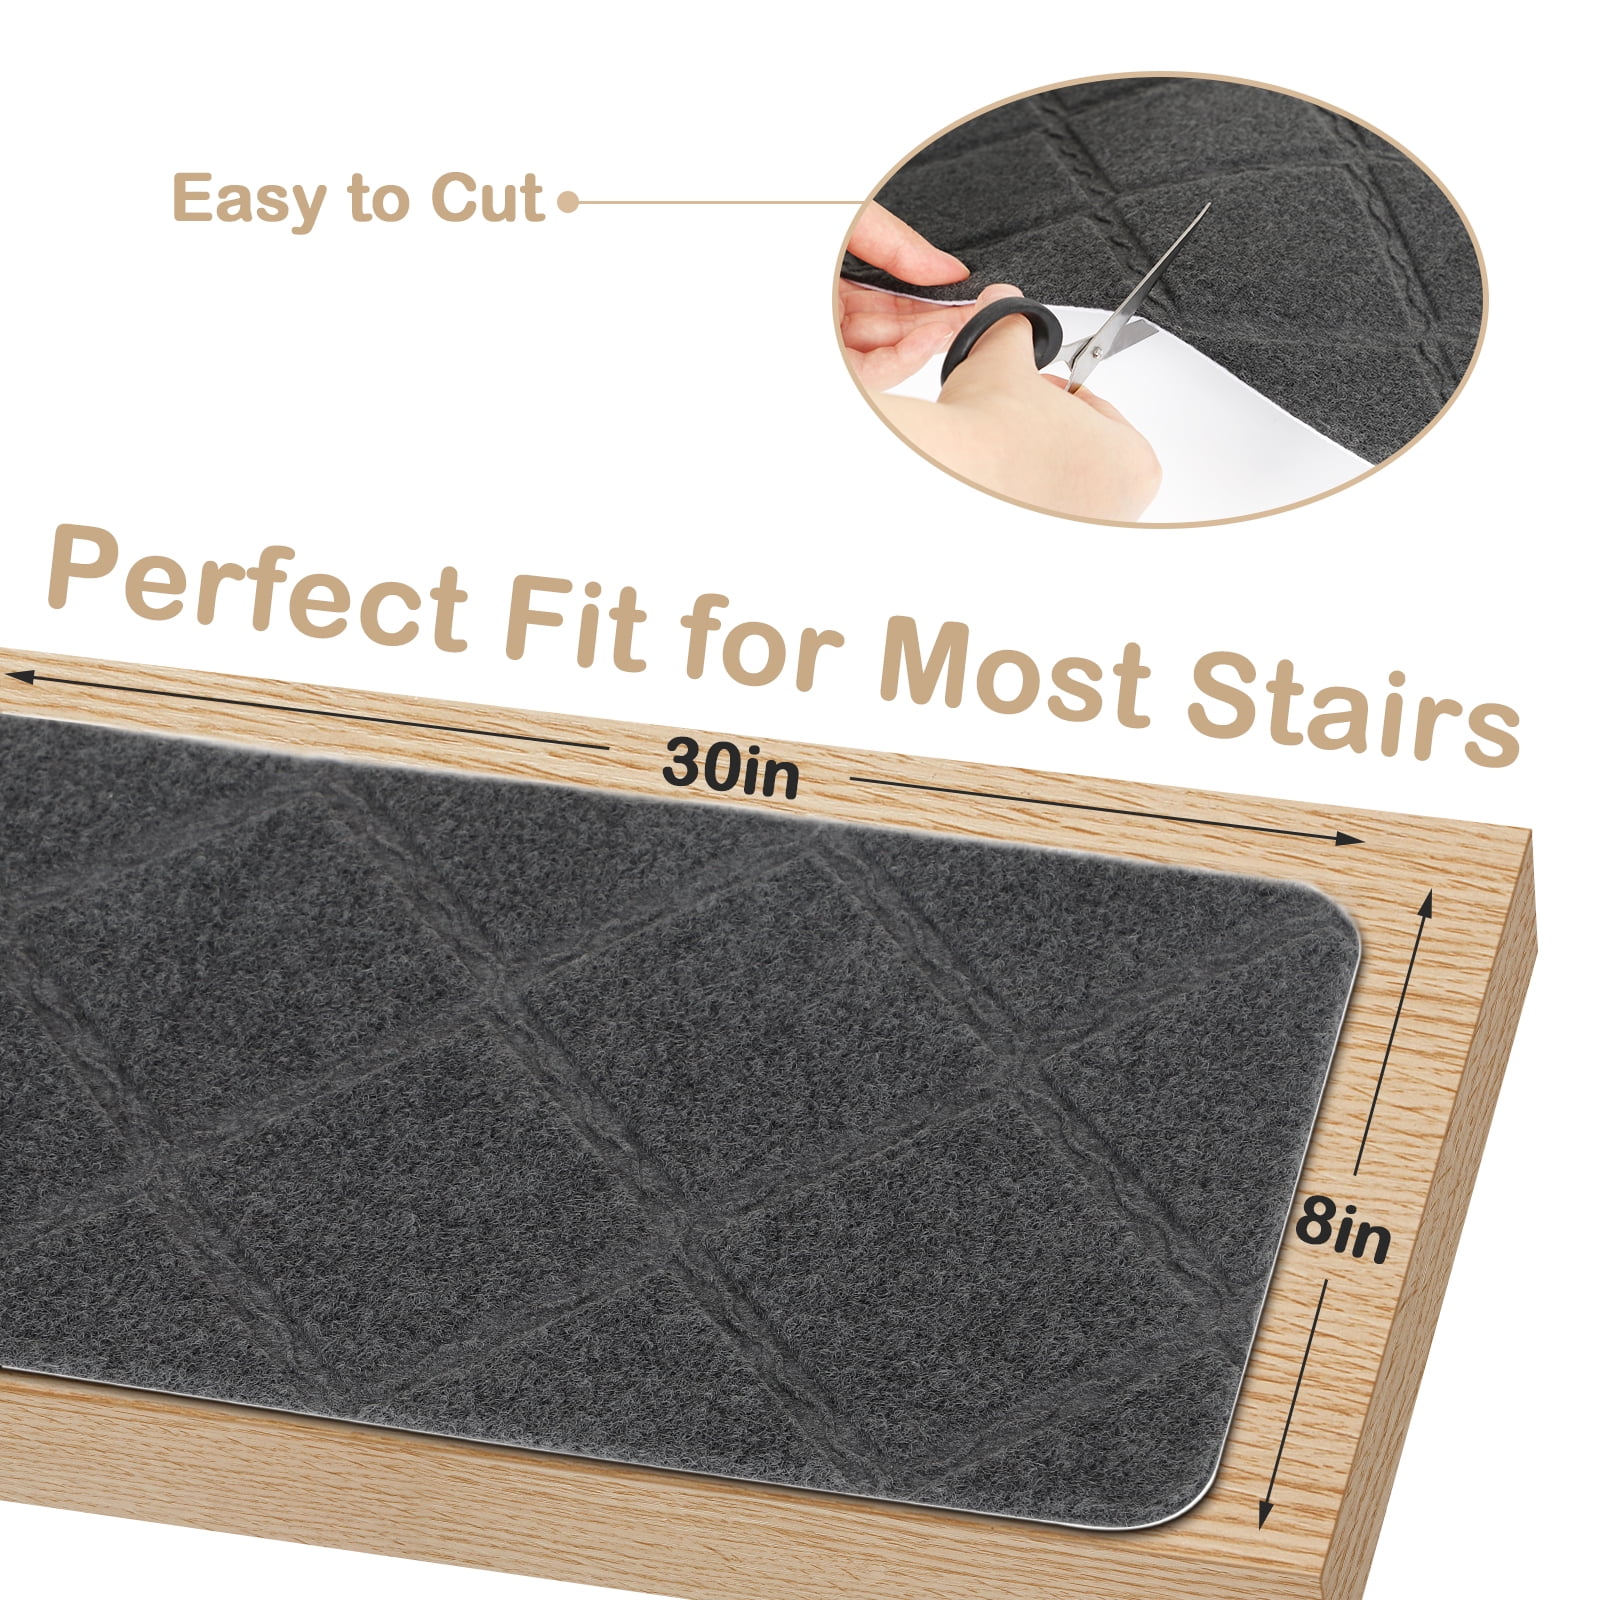  RIOLAND Stair Treads Carpet Non-Slip Indoor 15 PCS Wood Stair  Treads Rugs Anti Moving Modern Stair Runners Safety for Kids Dogs, 8 X  30, Diamond Light Gray : Tools & Home